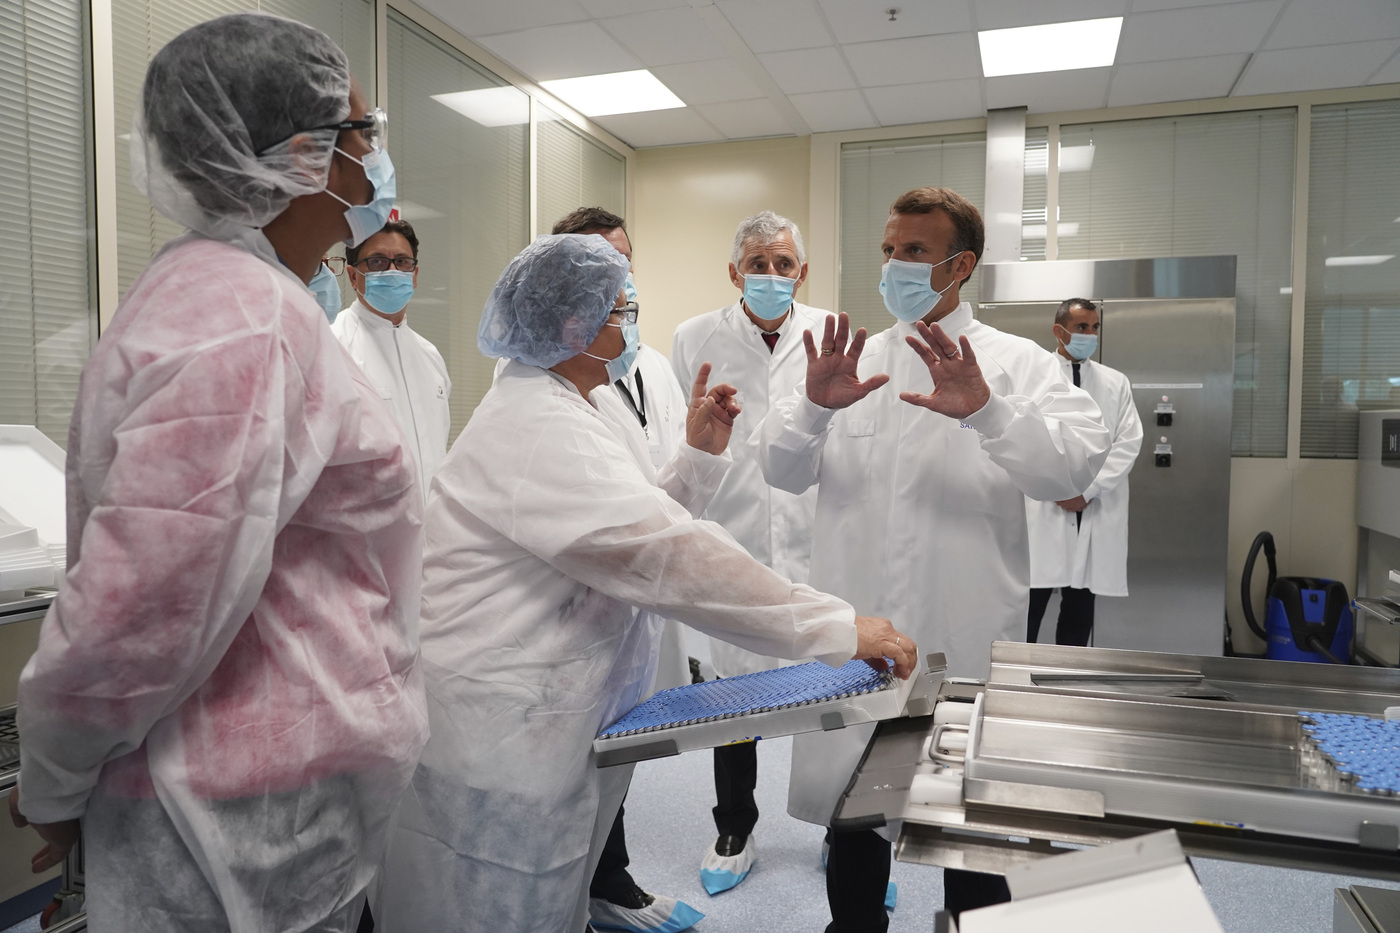 French President Emmanuel Macron talks to a group of esearchers as he visits an industrial development laboratory at French drugmaker's vaccine unit Sanofi Pasteur plant in Marcy-l'Etoile, near Lyon, central France, Tuesday, June 16, 2020.The visit comes after rival pharmaceutical company AstraZeneca this weekend announced a deal to supply 400 million vaccine doses to EU countries, including France. (AP Photo/Laurent Cipriani, Pool)